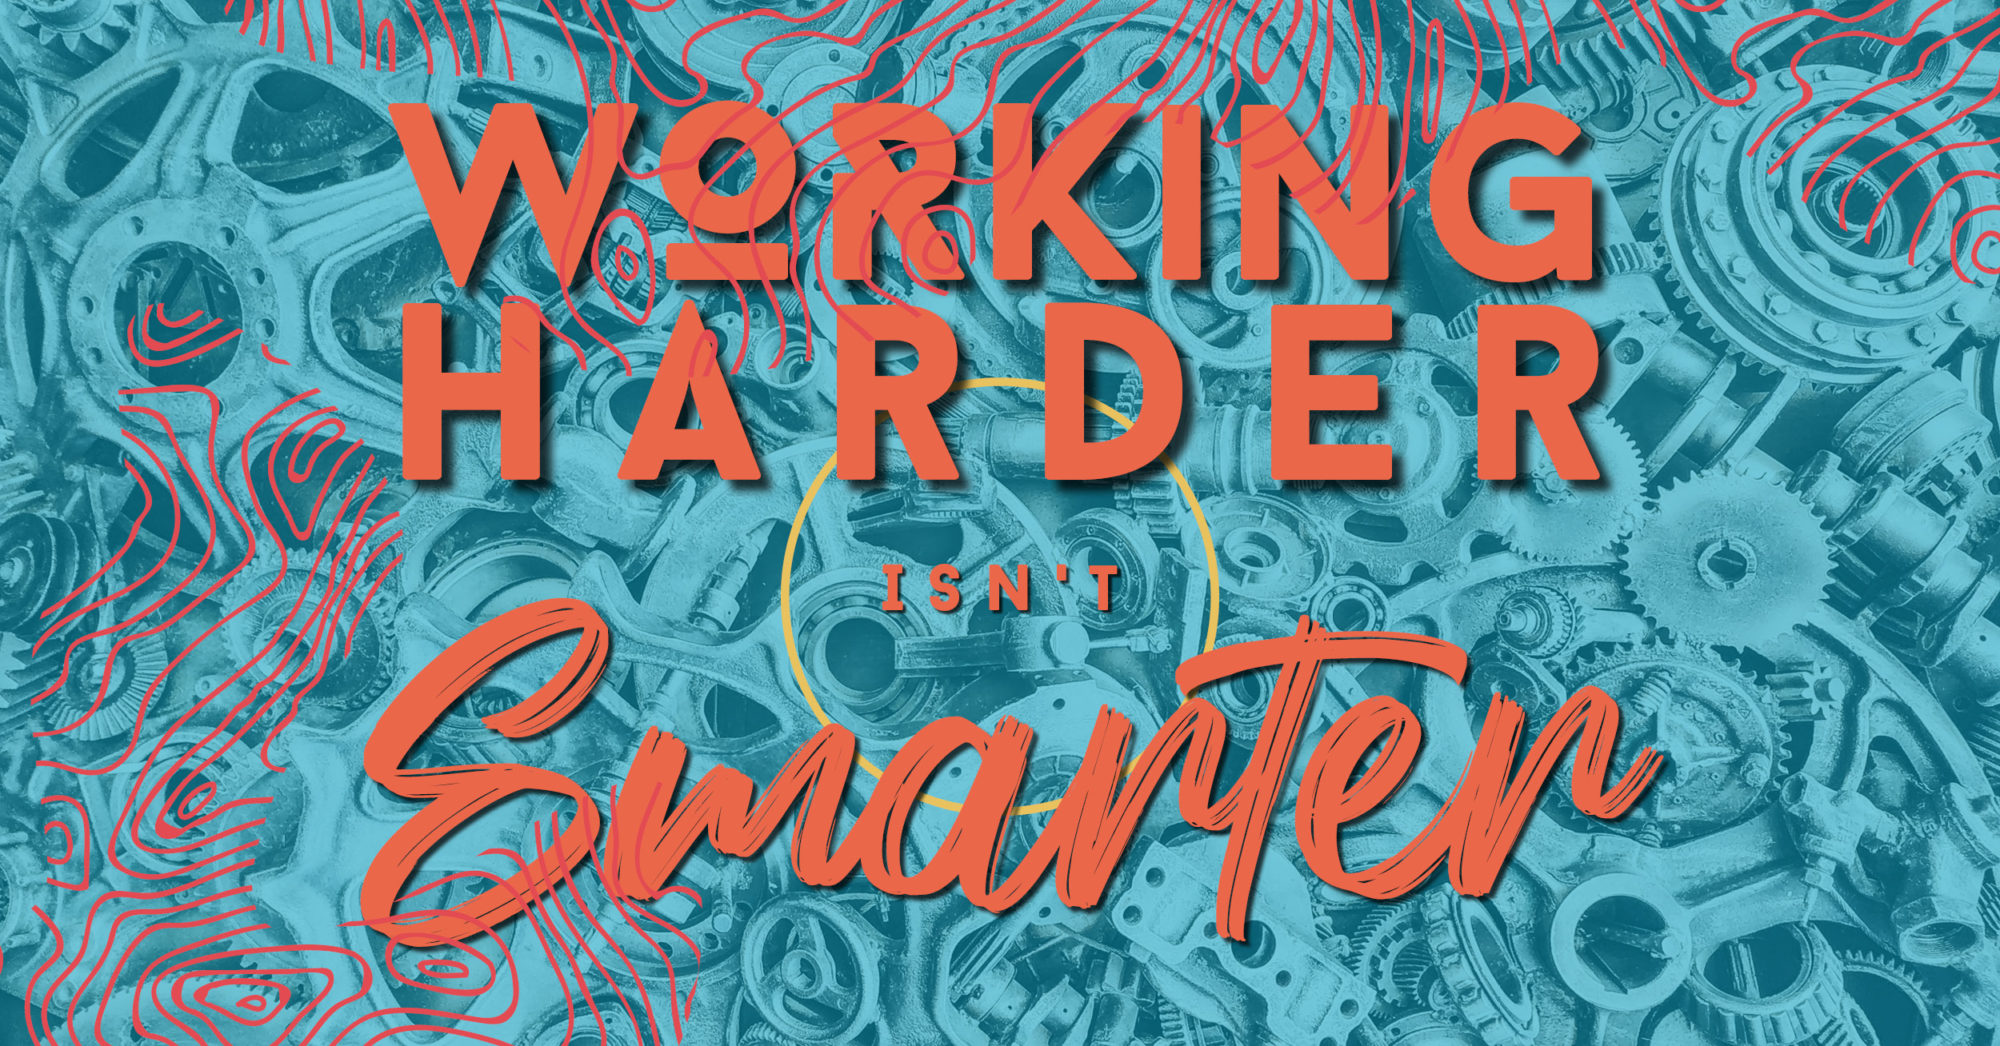 Orange text saying "Working Harder Isn't Smarter" over top of a dark and light blue swirled background